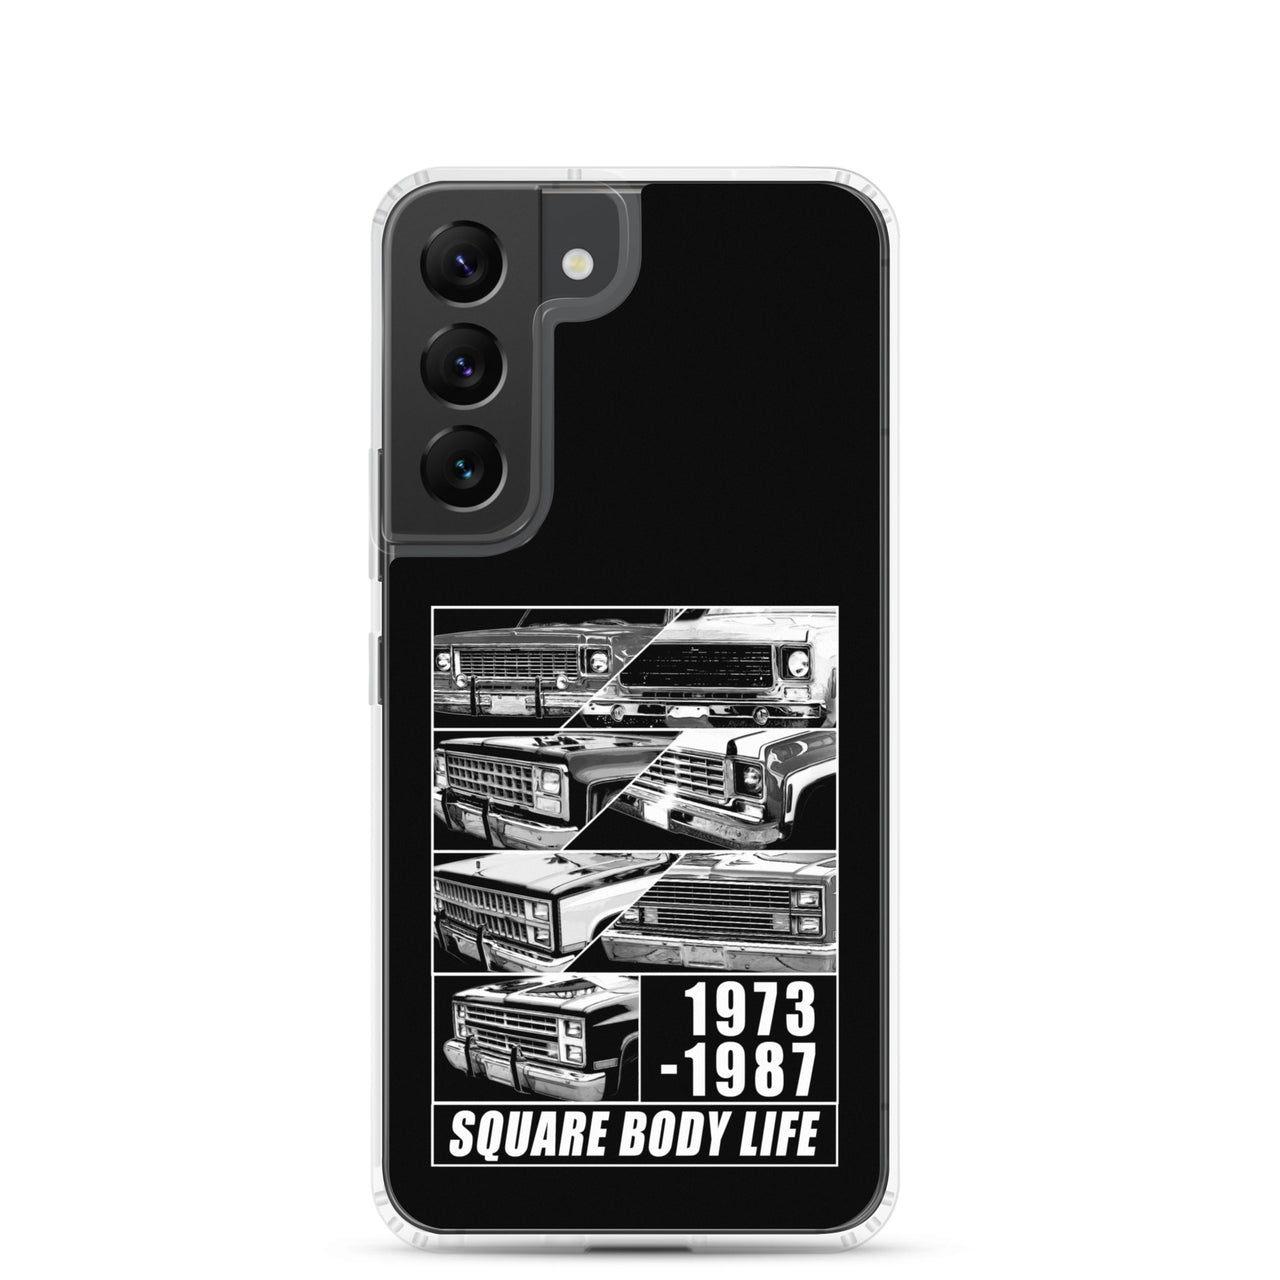 Squarebody Truck Samsung Phone Case For S22